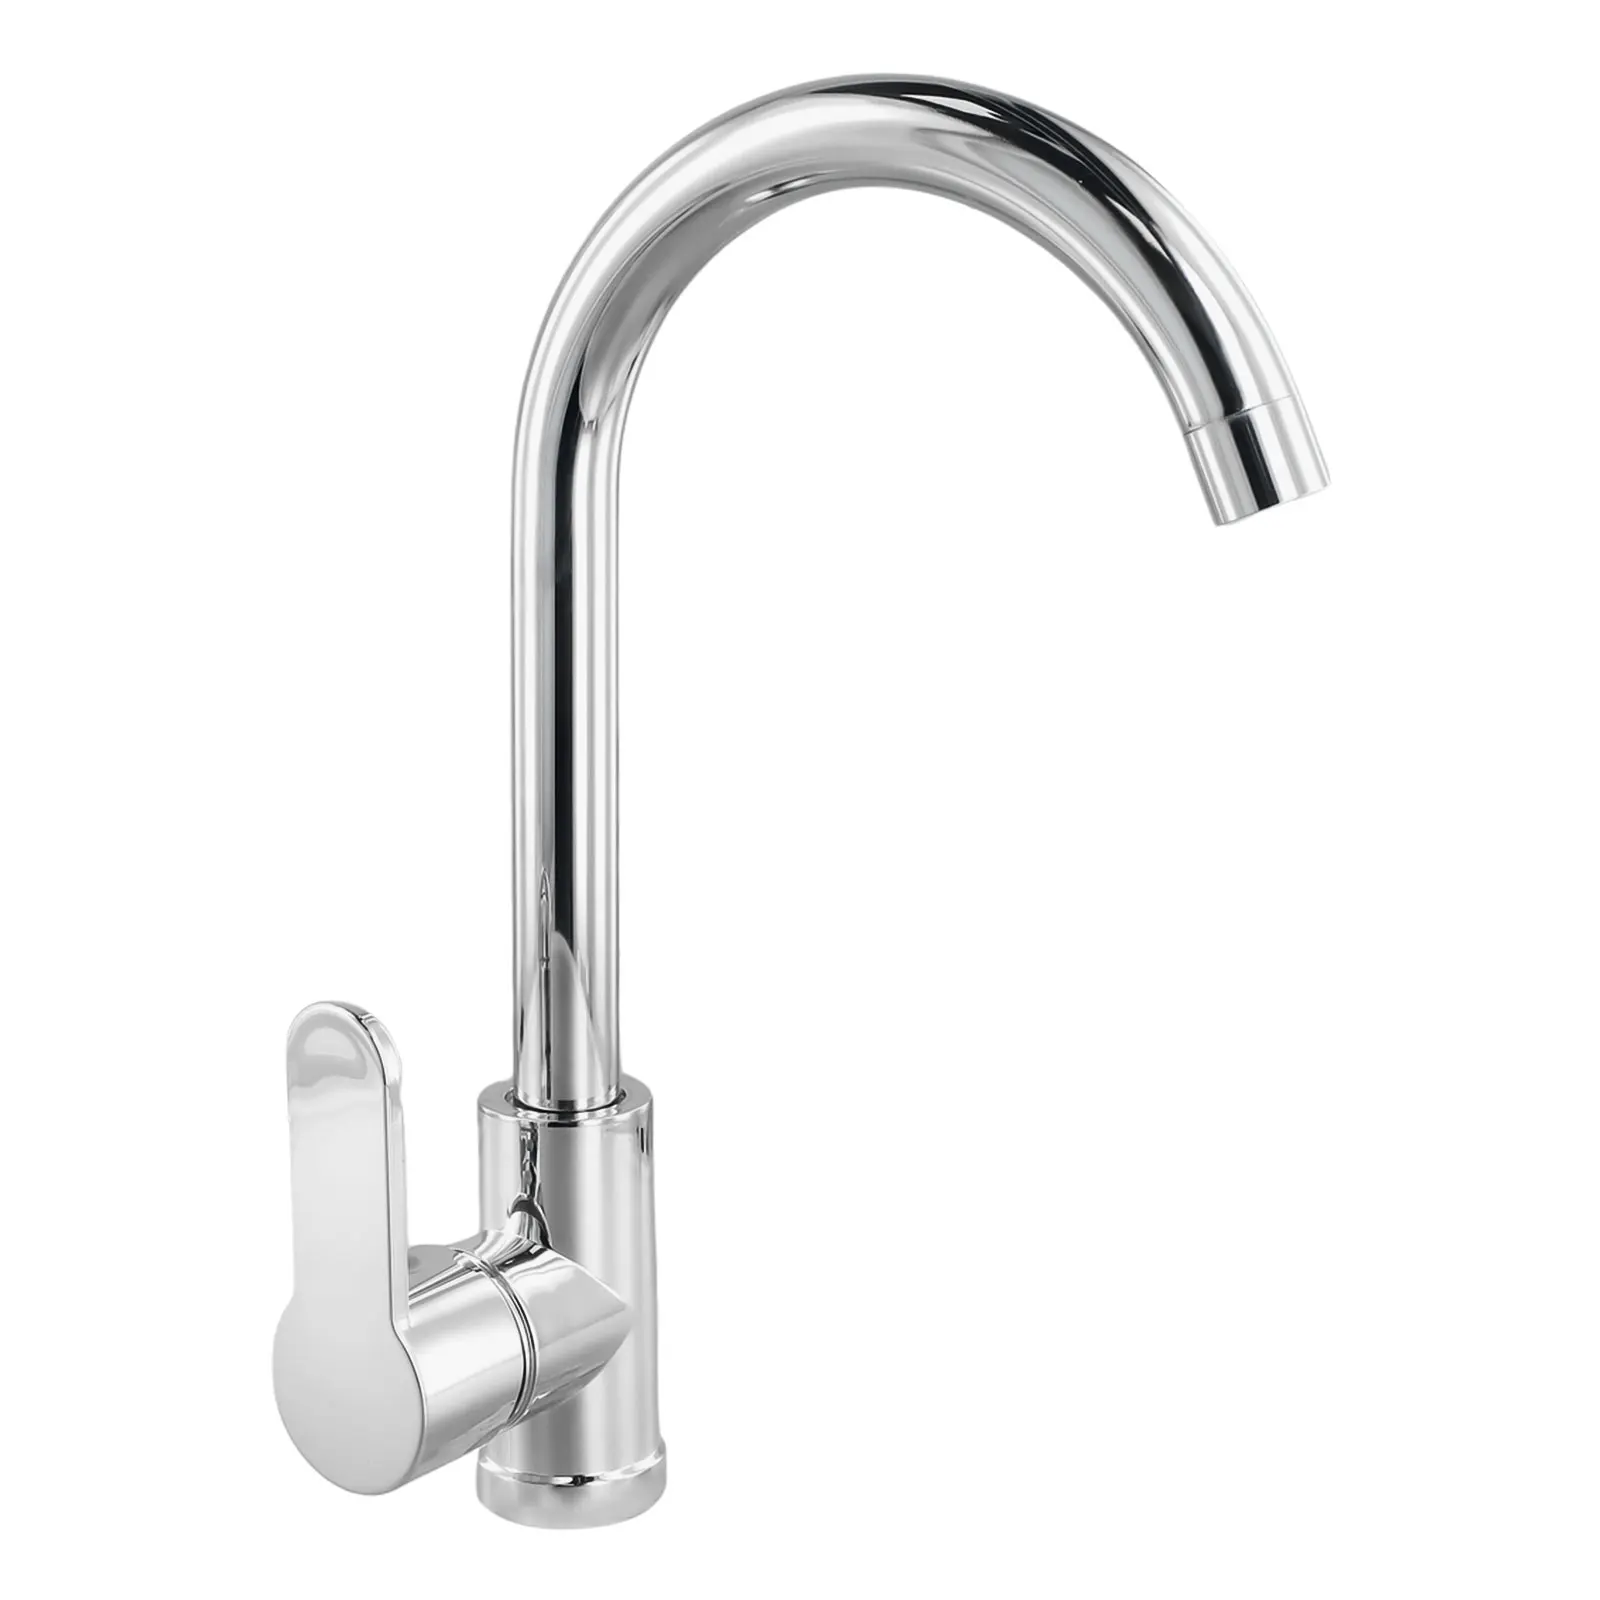 Stainless Steel Kitchen Faucet Polished Chrome Plated Swivel Basin Sink Cold Hot Easy To Operate Mixer Tap shai chrome finish kitchen faucet hot